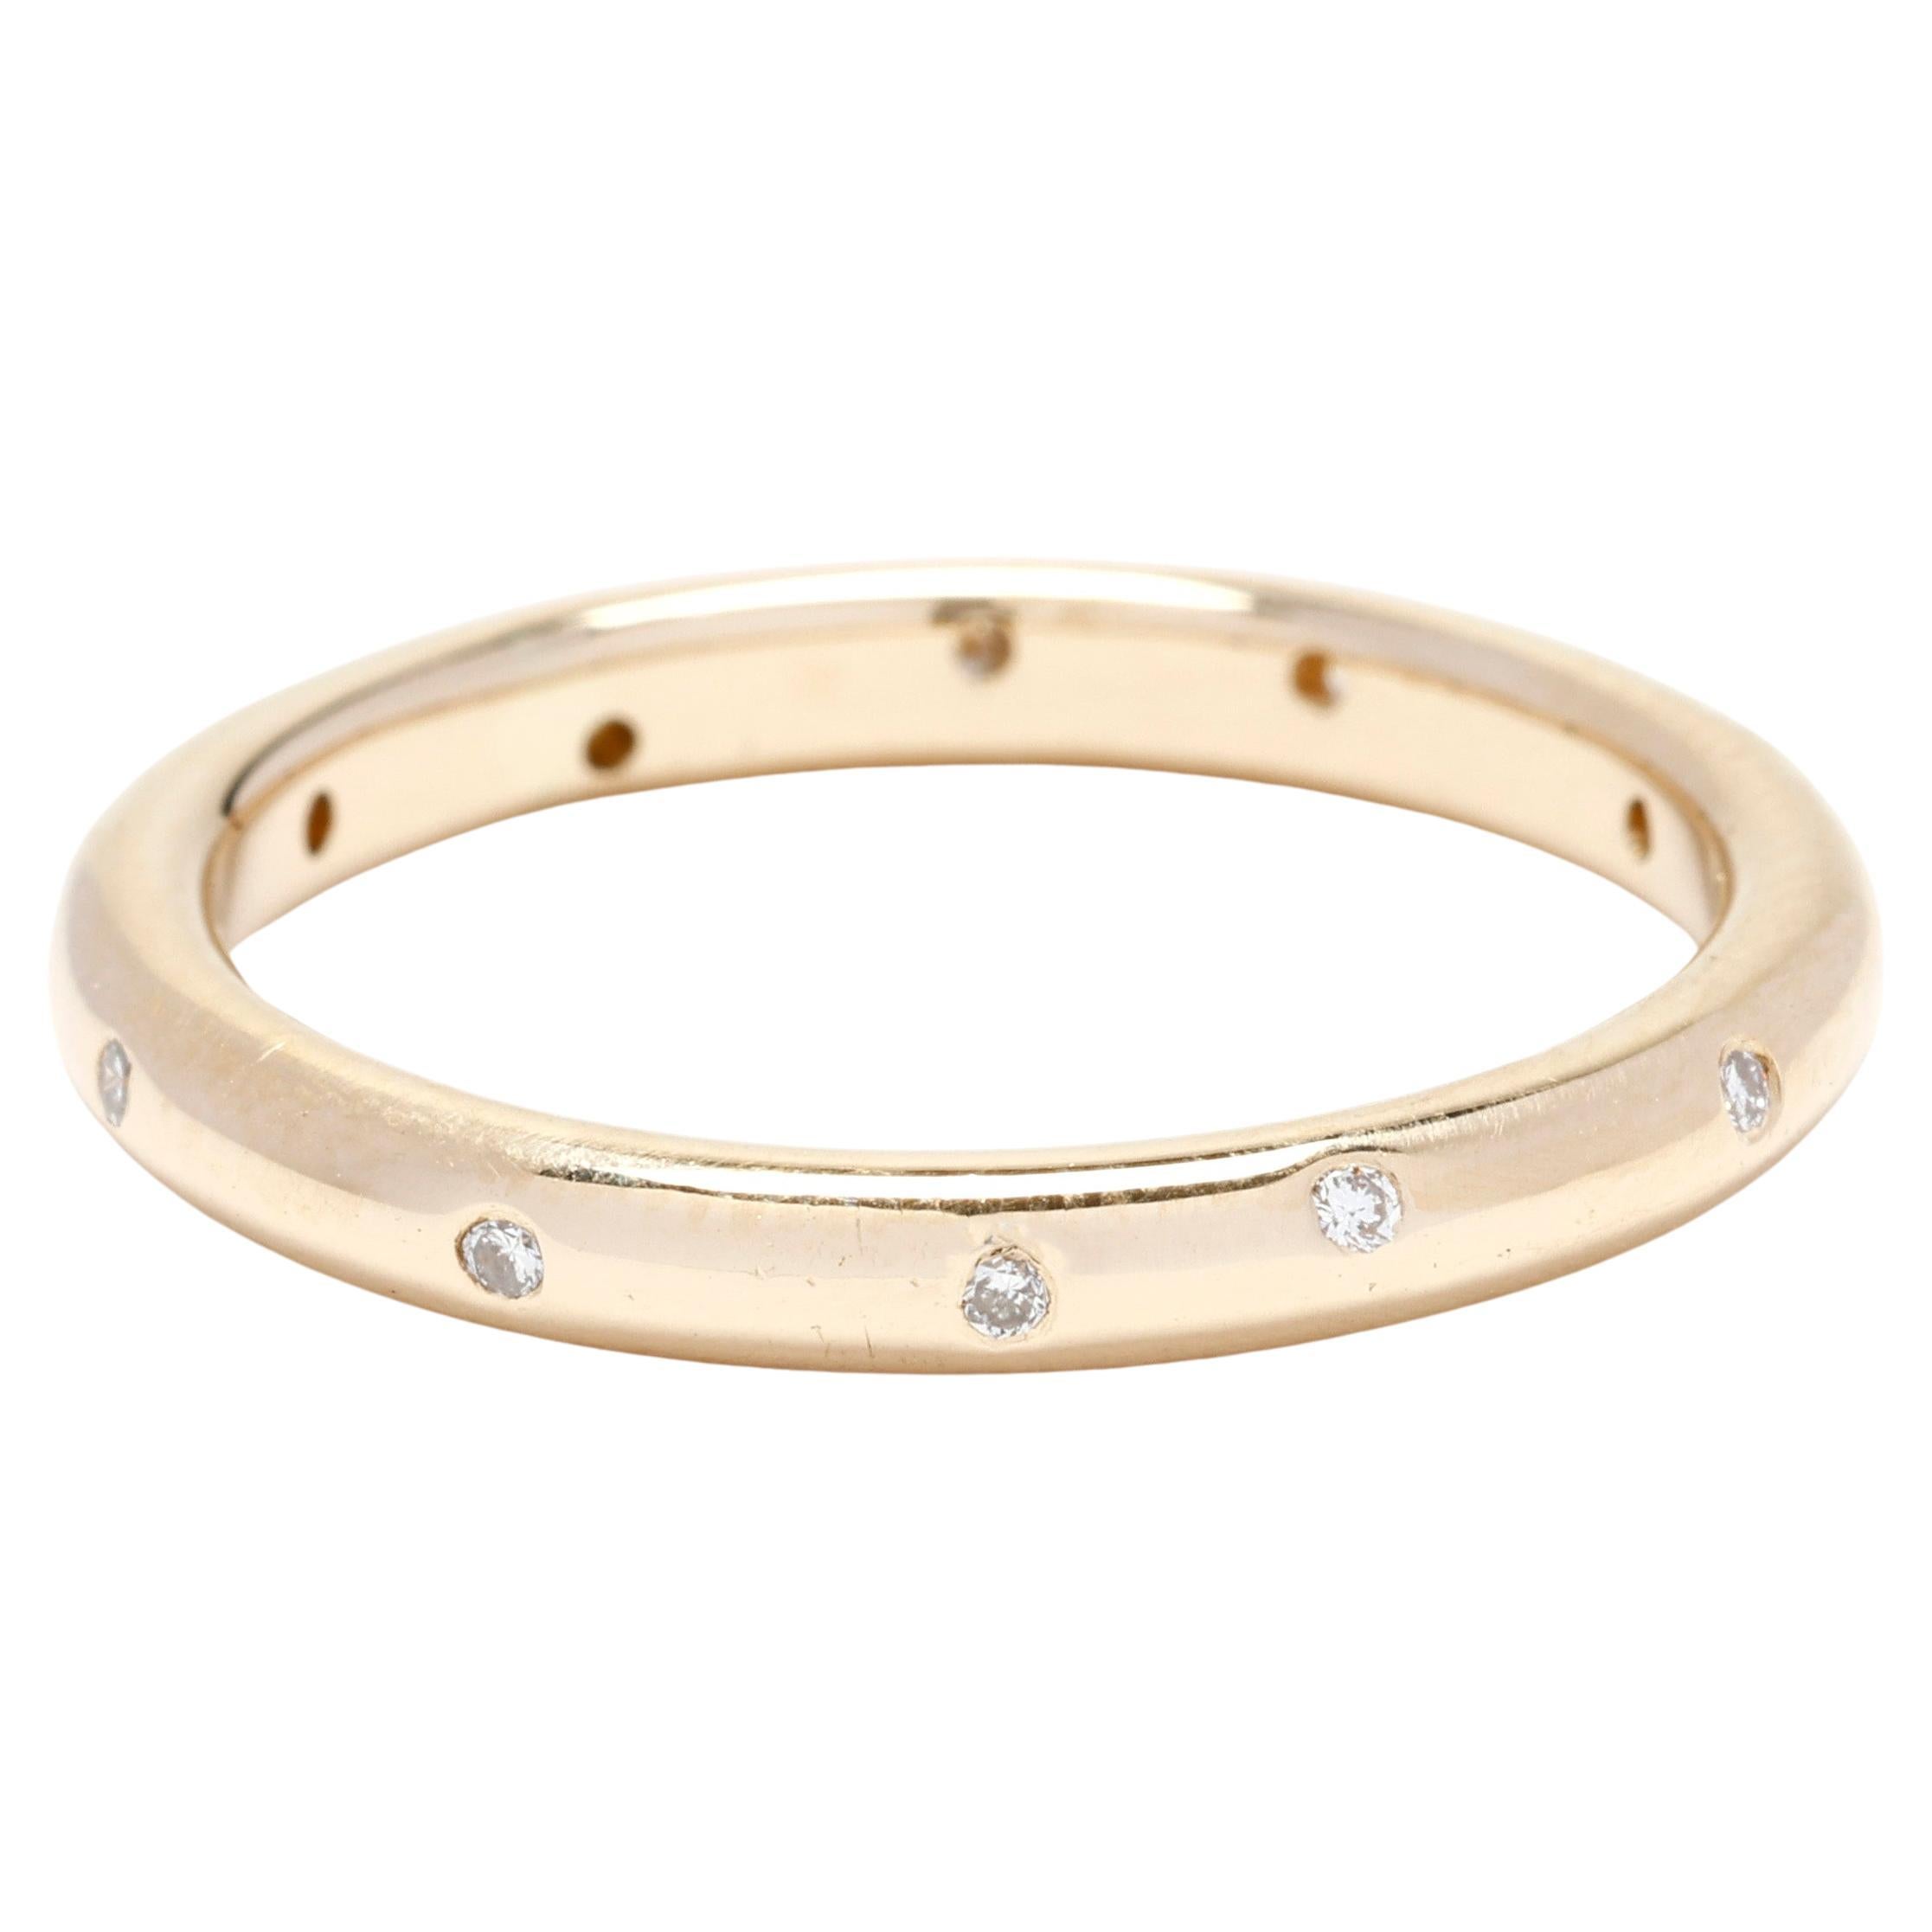 0.06ctw Diamond Band Ring, 18k Yellow Gold, Ring Size 6.25, Scattered Diamonds